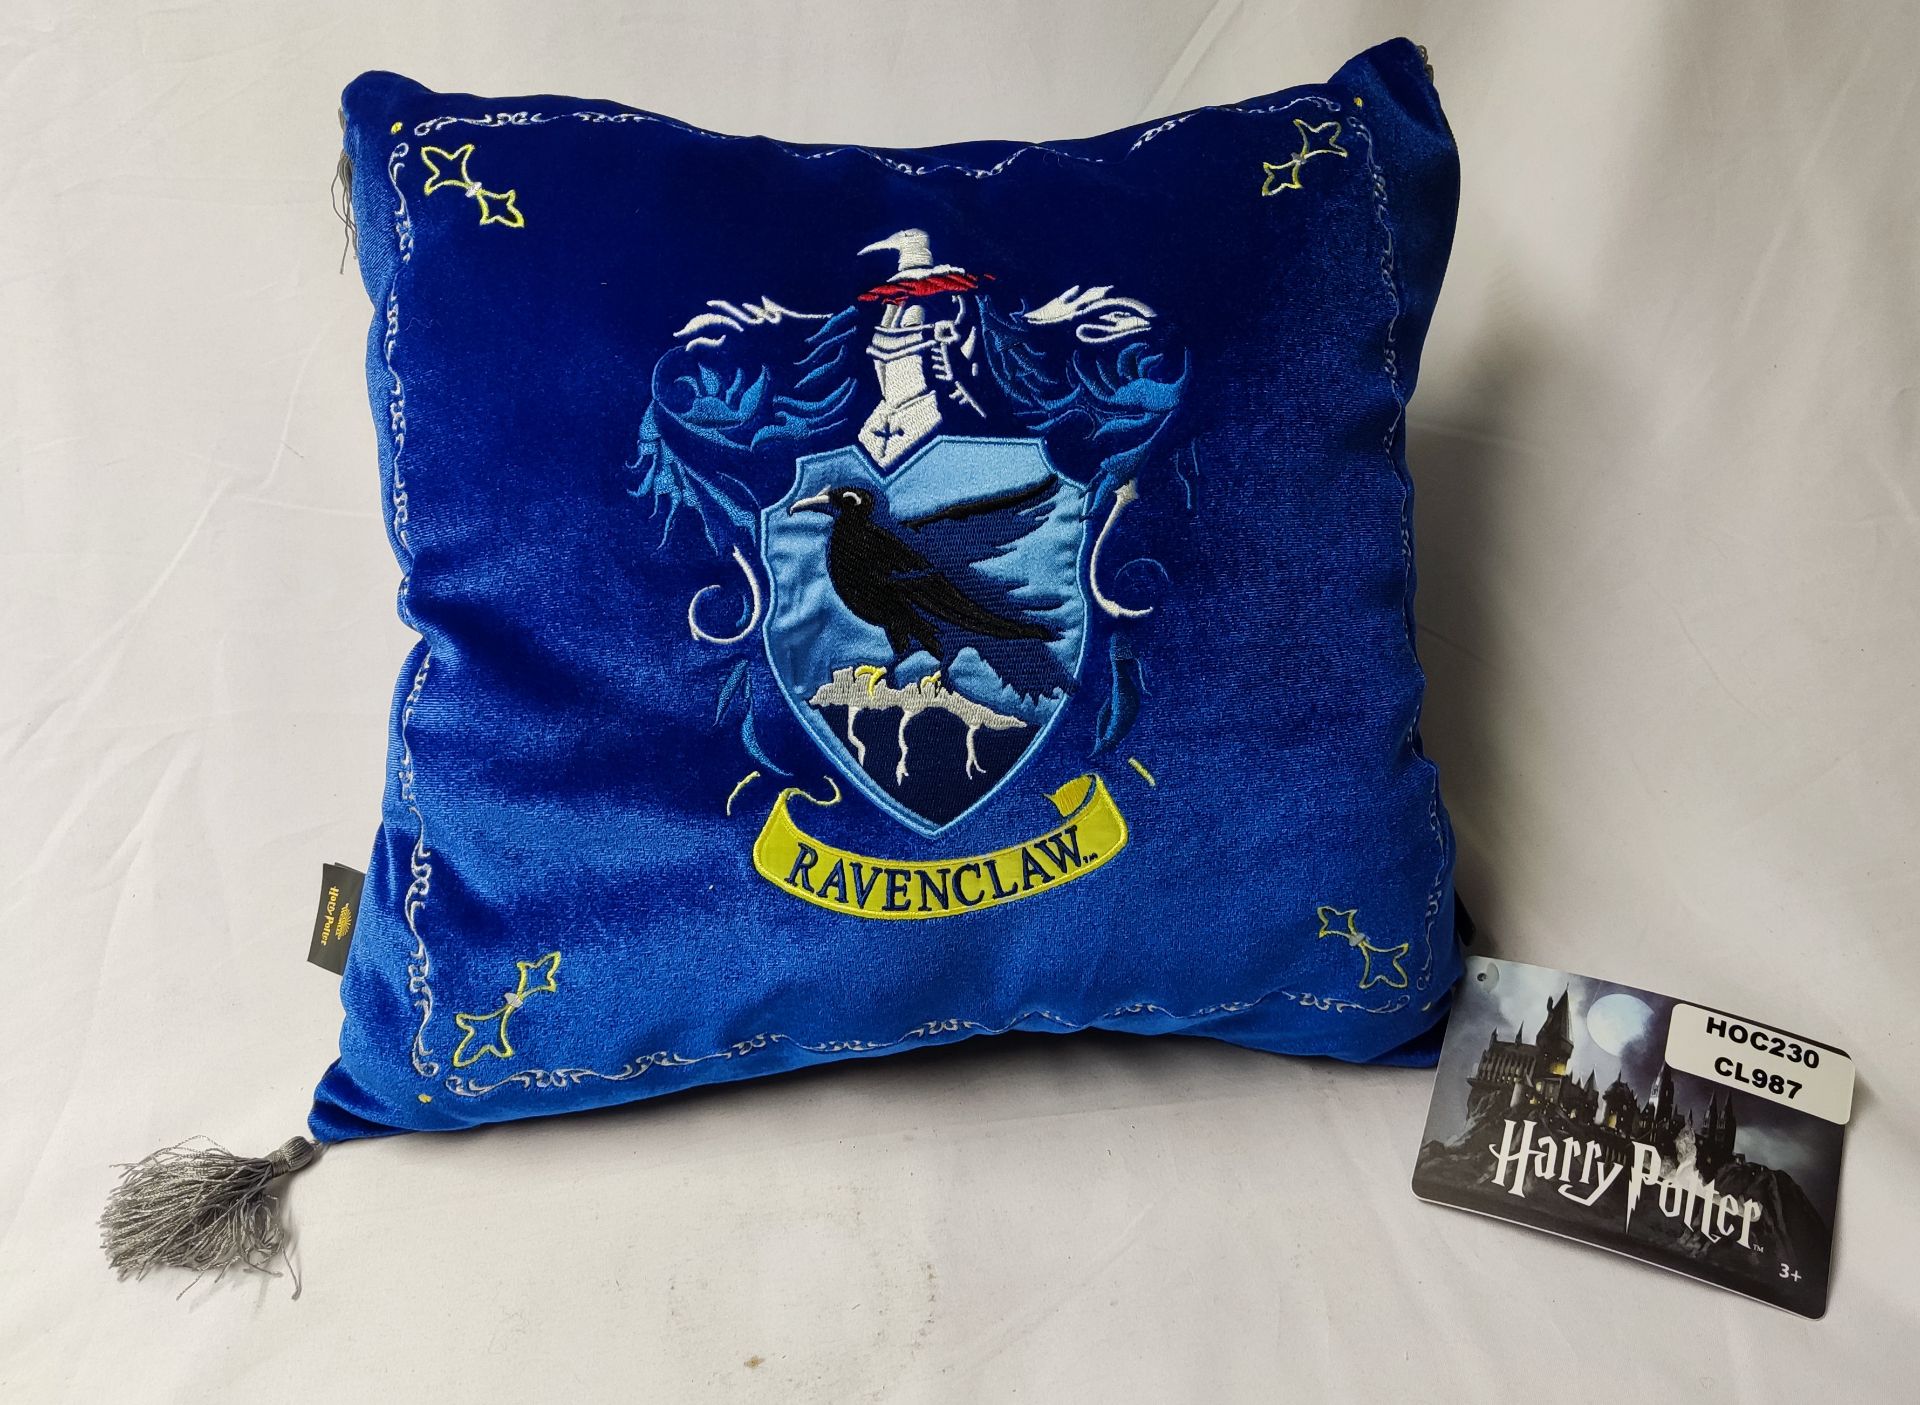 1 x NOBLE COLLECTION Harry Potter Ravenclaw House Mascot Cushion - New/Unused - RRP £39.95 - Ref: / - Image 3 of 11